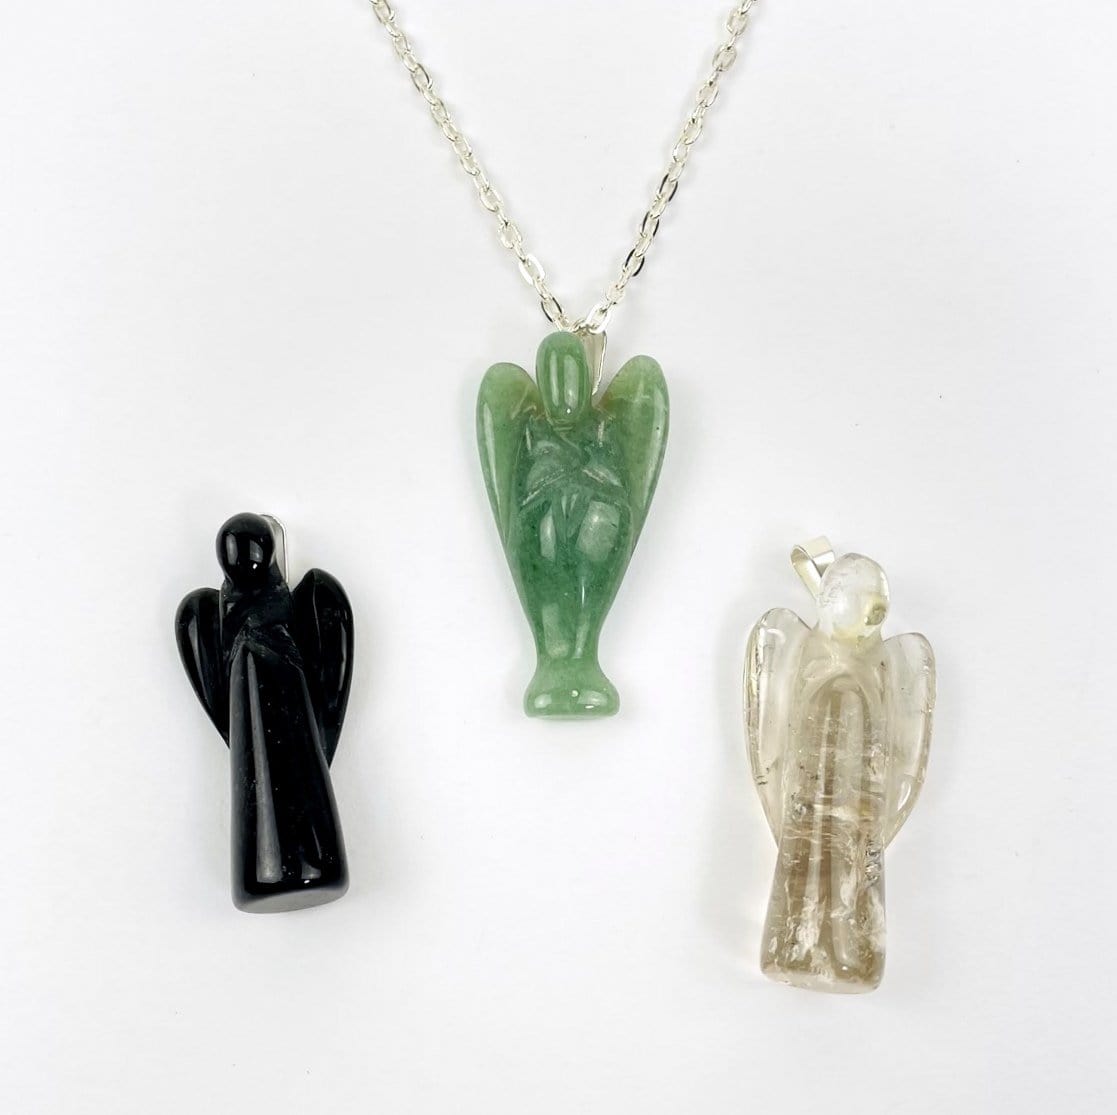 Angel Pendant - one on a chain and 2 next to it